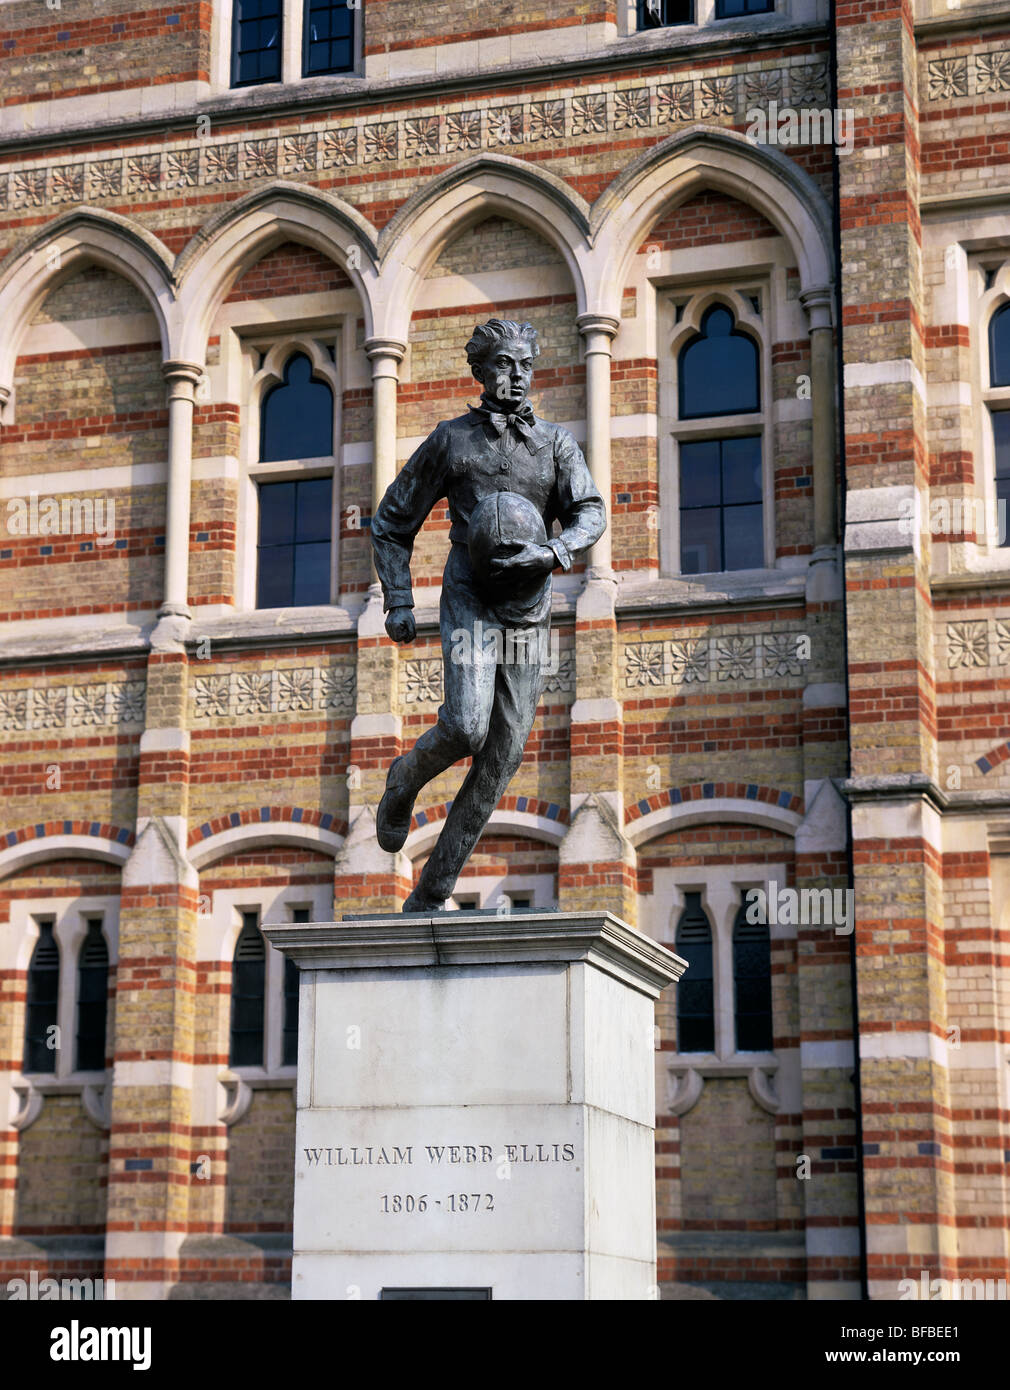 Statue of William Webb Ellis outside Rugby School, Rugby, Warwickshire, England. Stock Photo